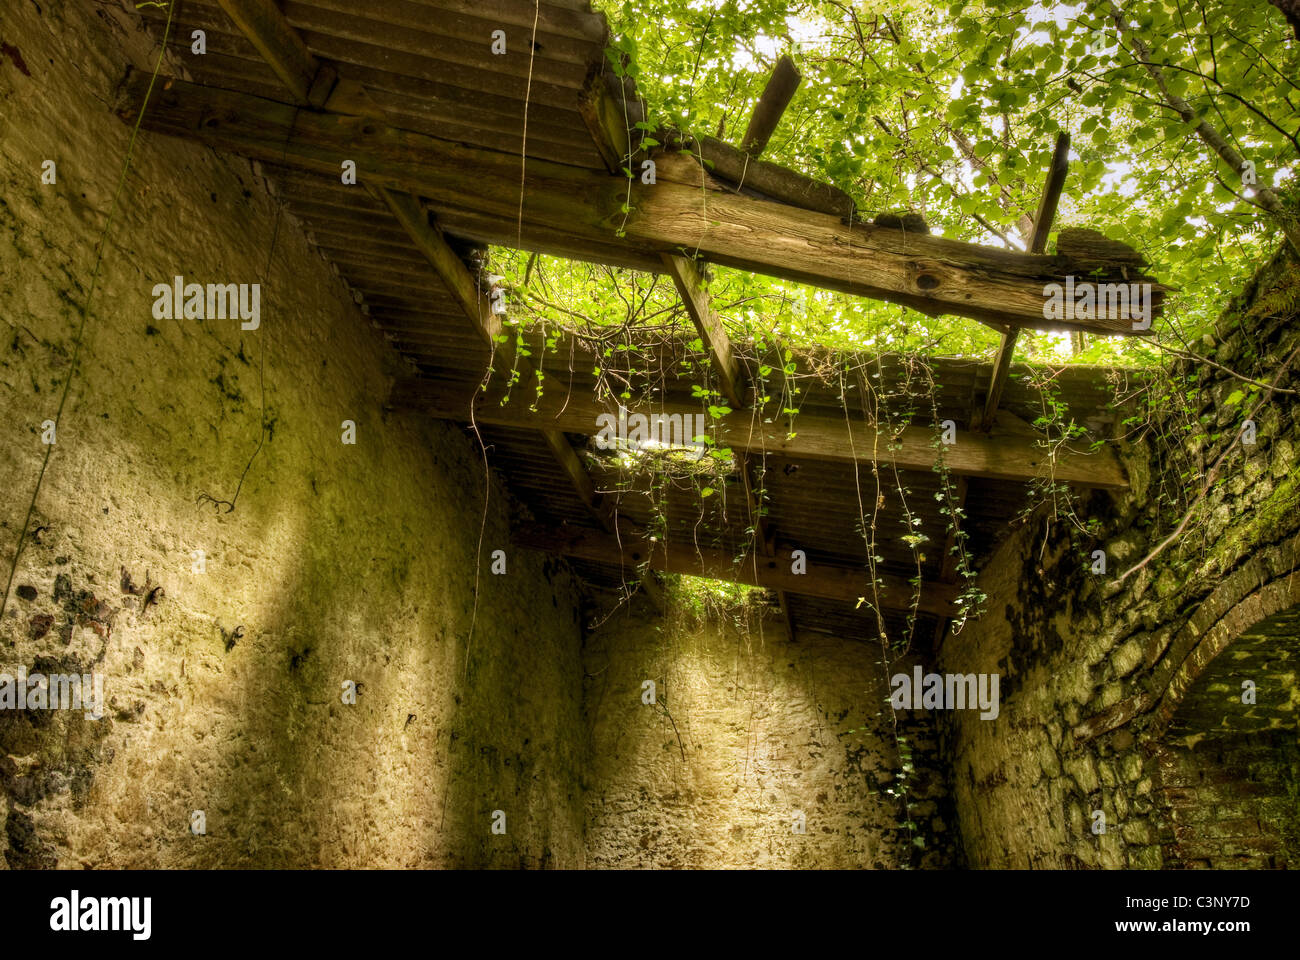 Derelict and overgrown timber roof at the old Fussells iron works at Mells, Somerset, uk taken in summer Stock Photo